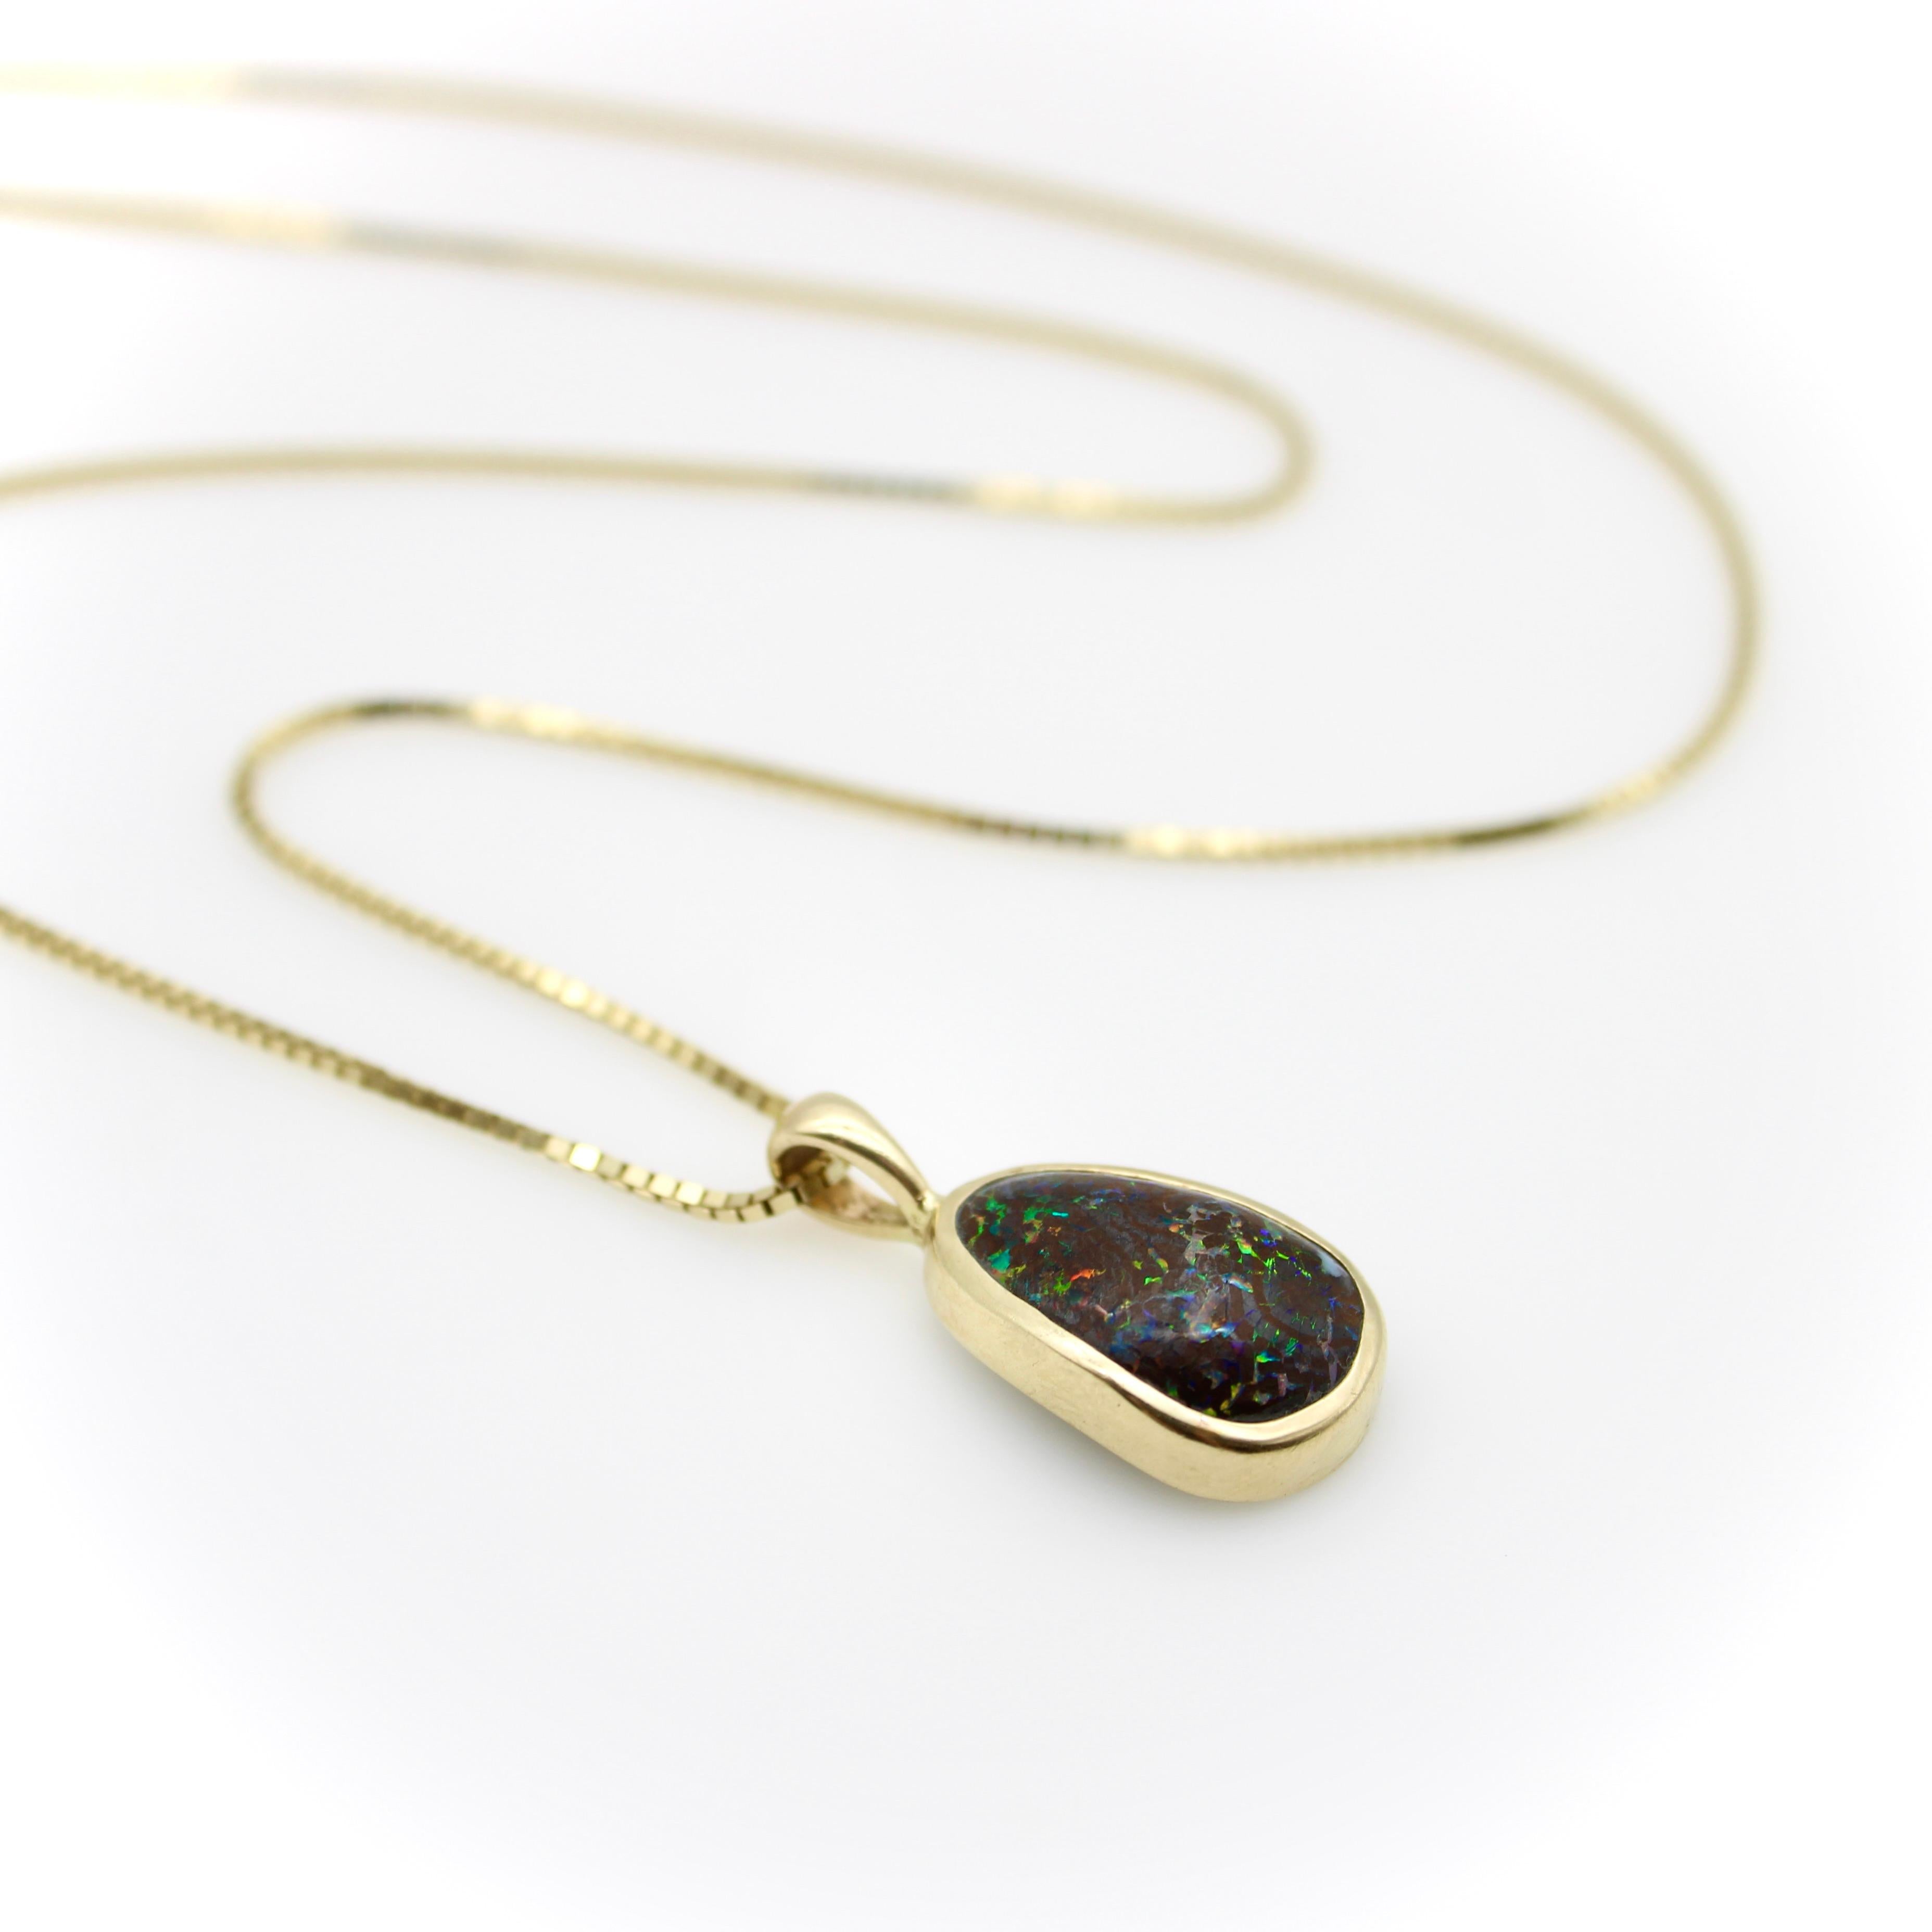 This organic form boulder opal has a pleasing, rounded triangular shape. It is bezel set with a custom bezel that gracefully hugs the form of the opal. Boulder opals are special because of their bright and vibrant colors that swirl like a galaxy